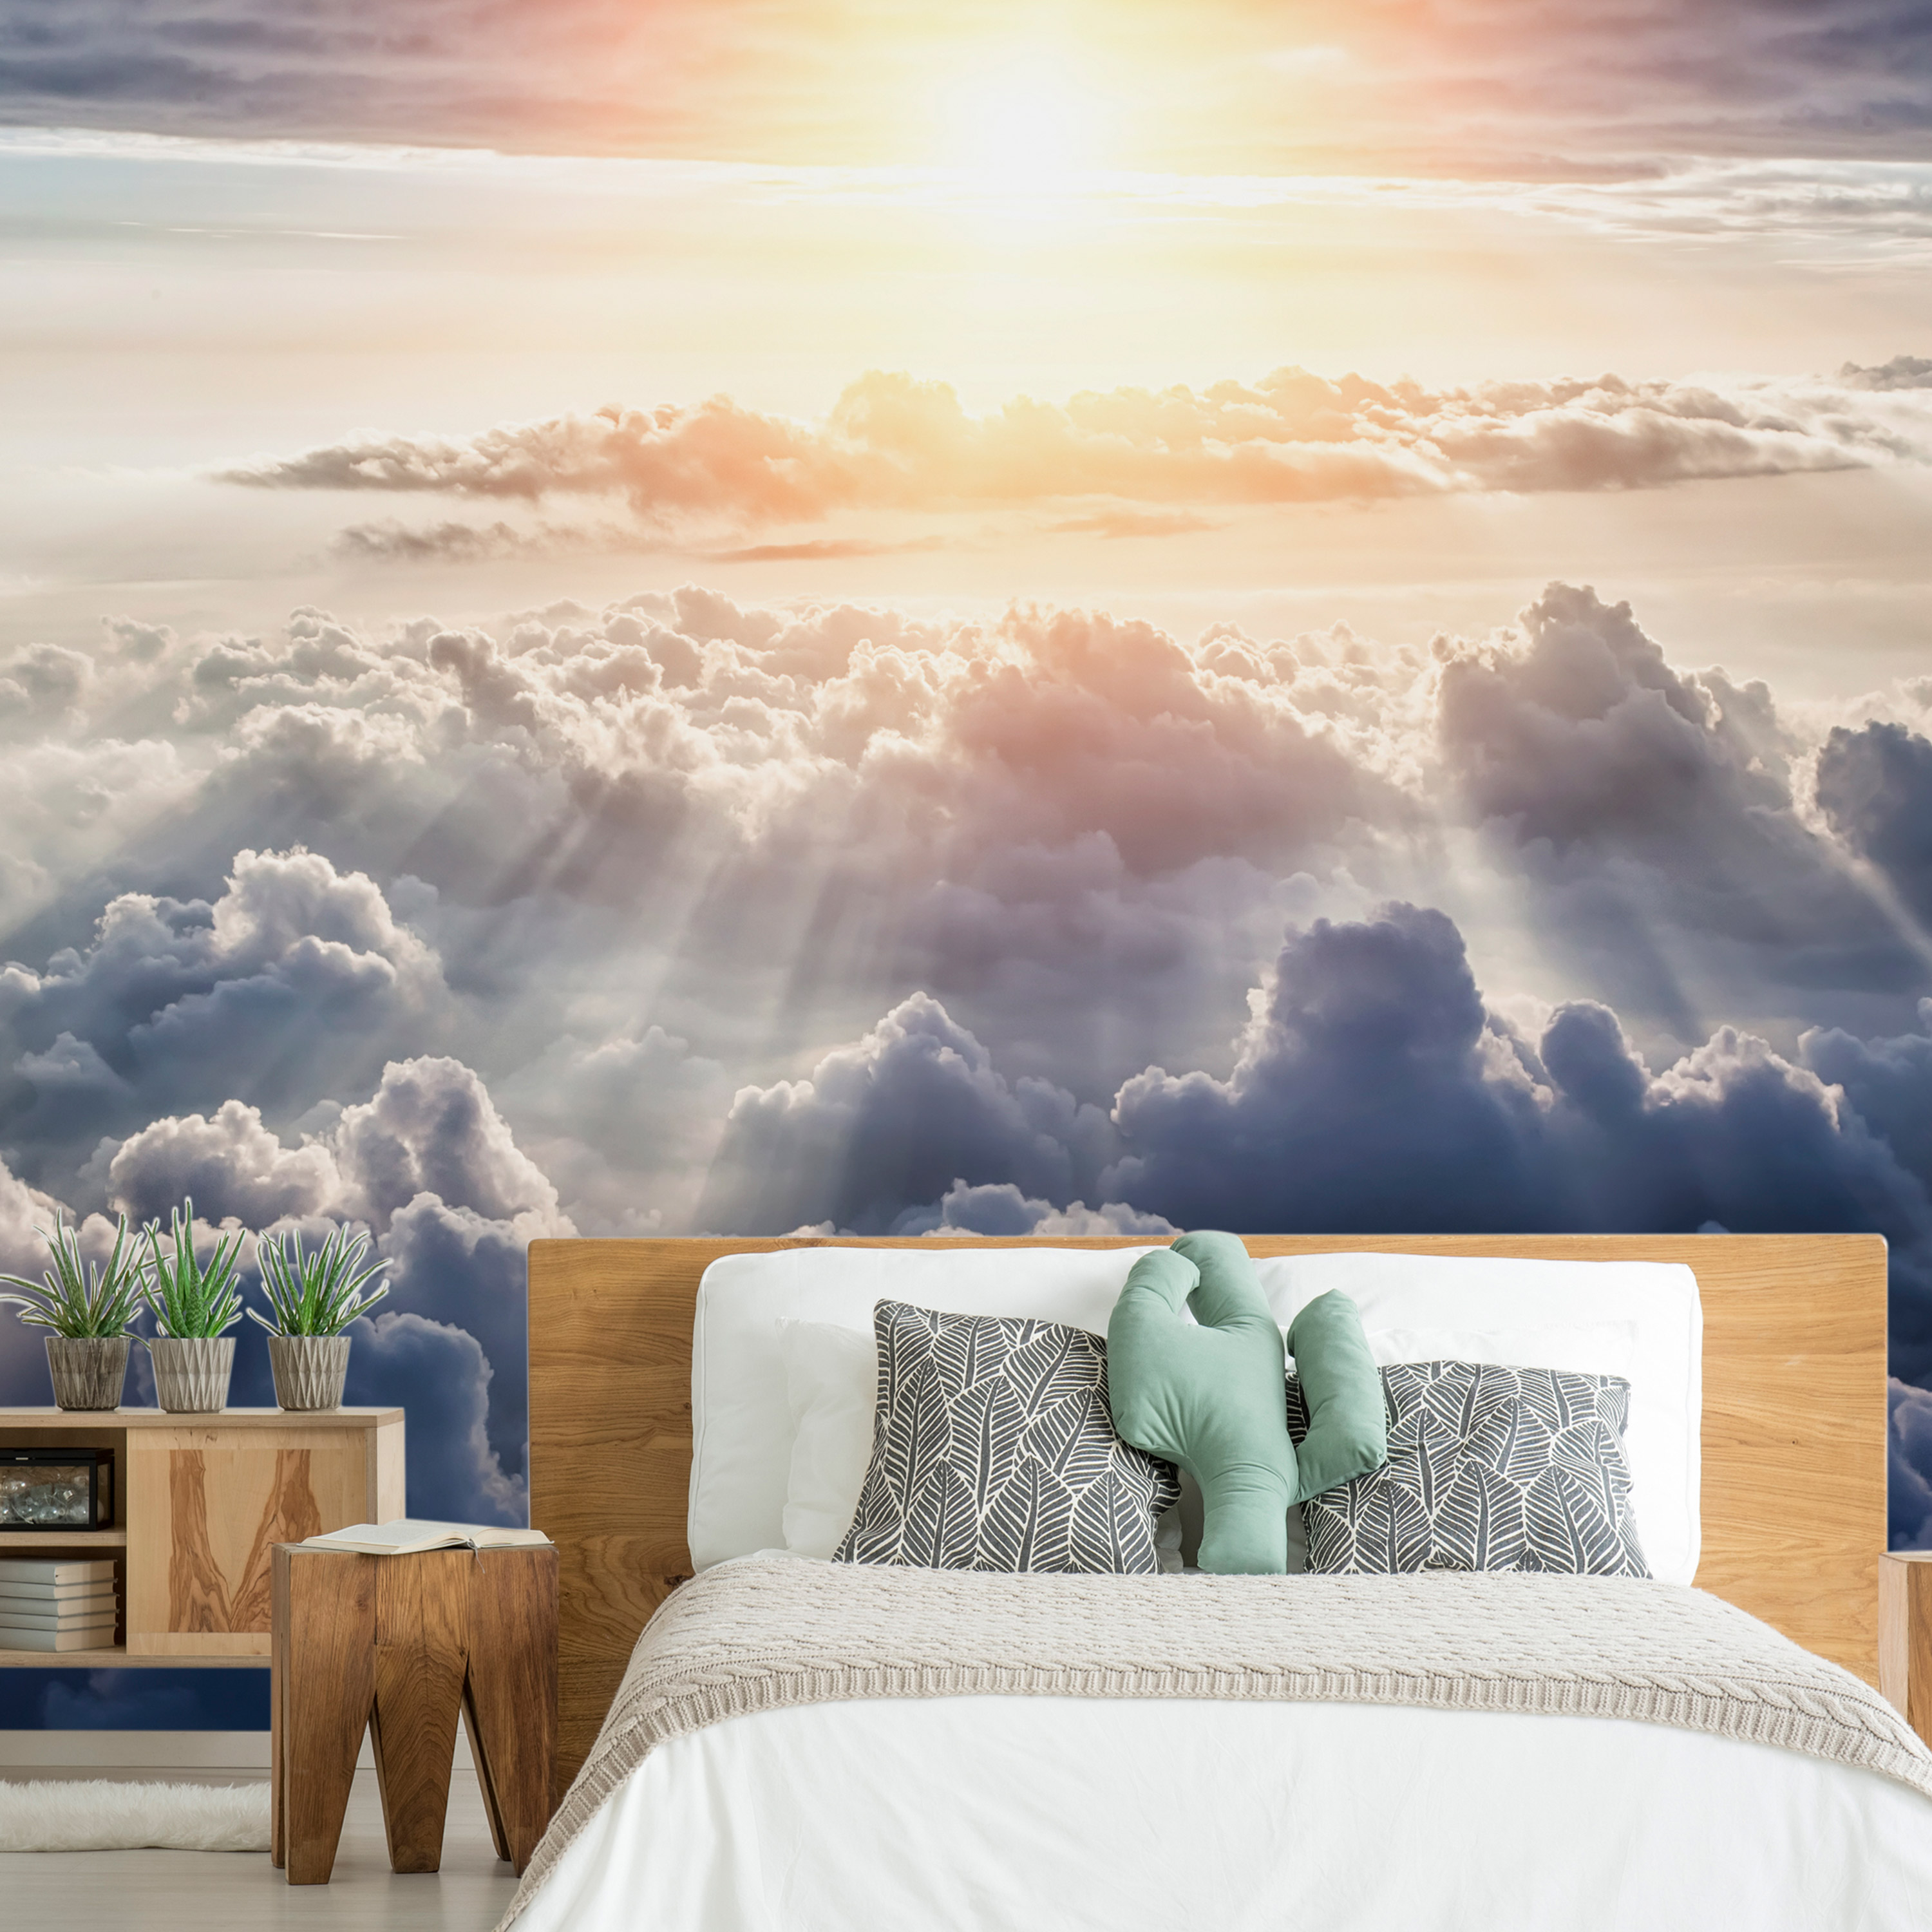 Self-adhesive Wallpaper - Walk in the Clouds - 392x280